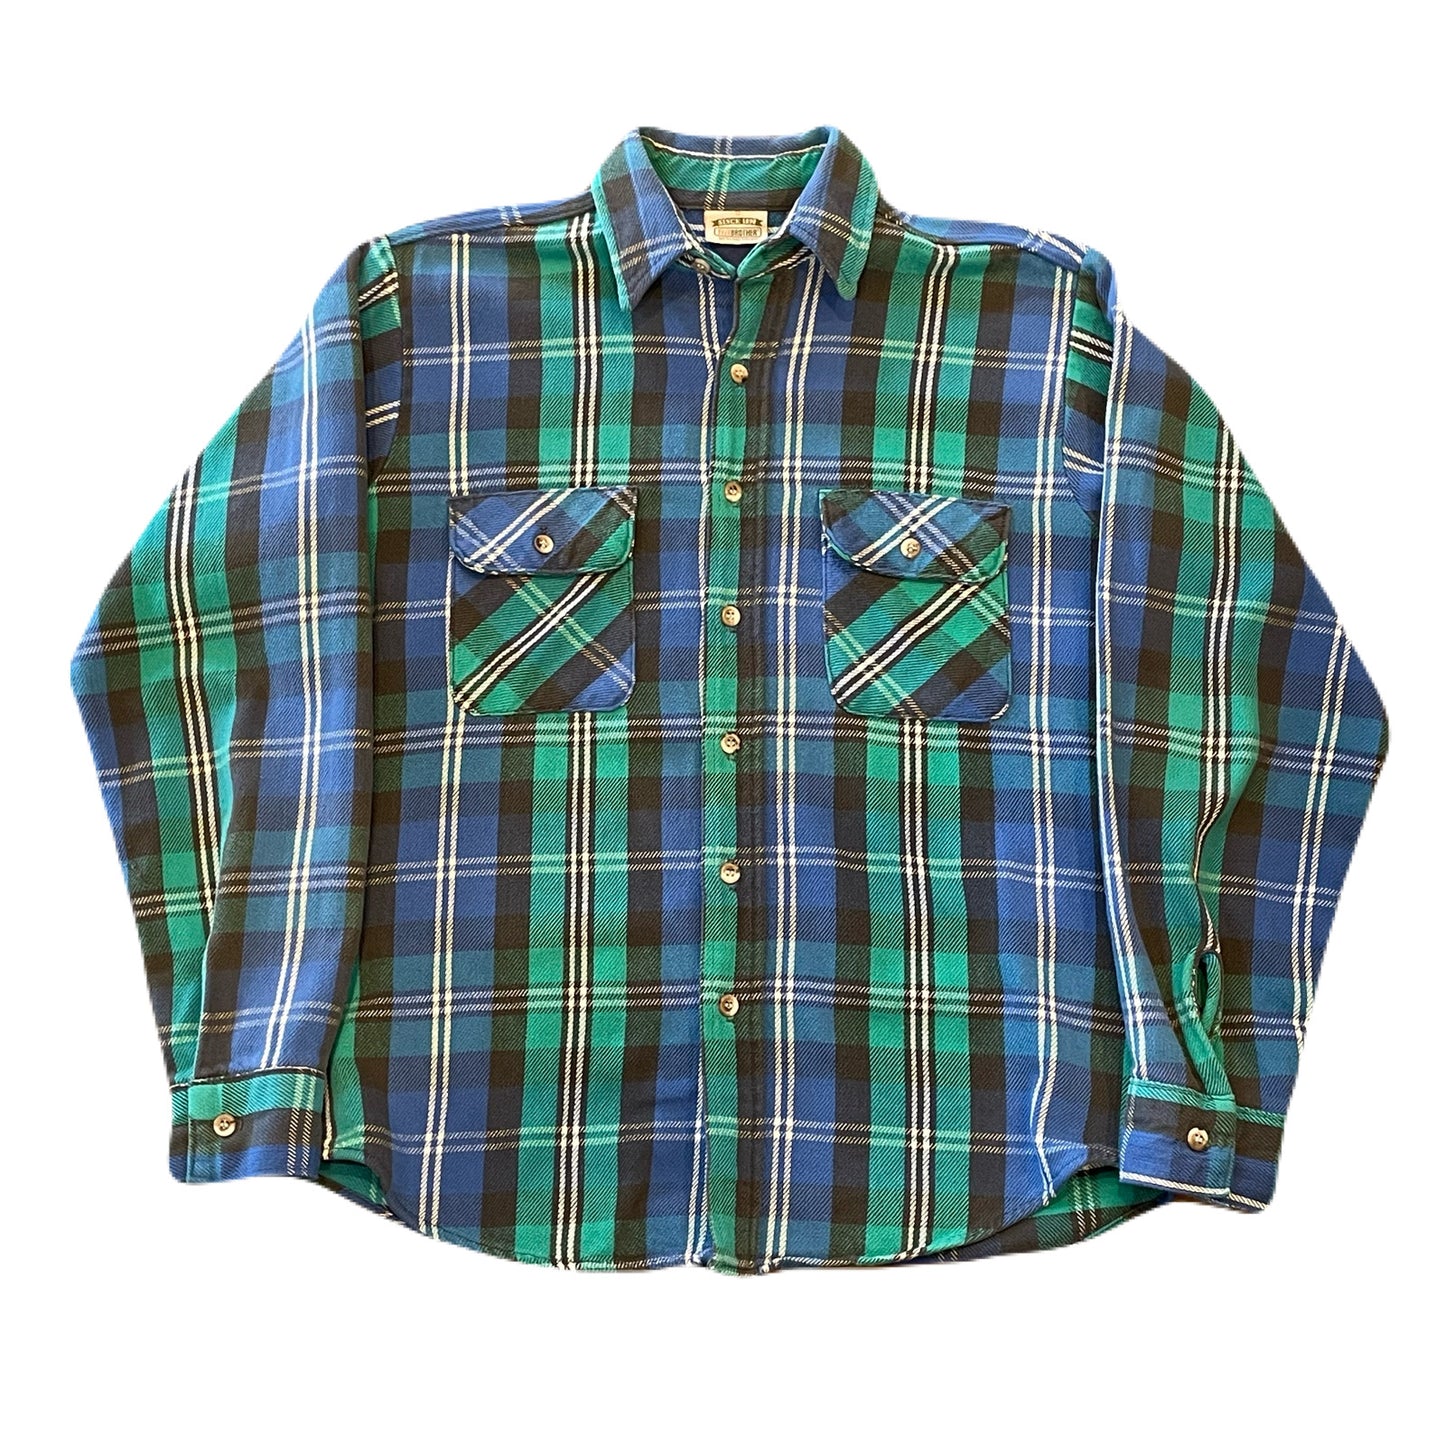 "90’s FIVE BROTHER" cotton flannel check shirt　M